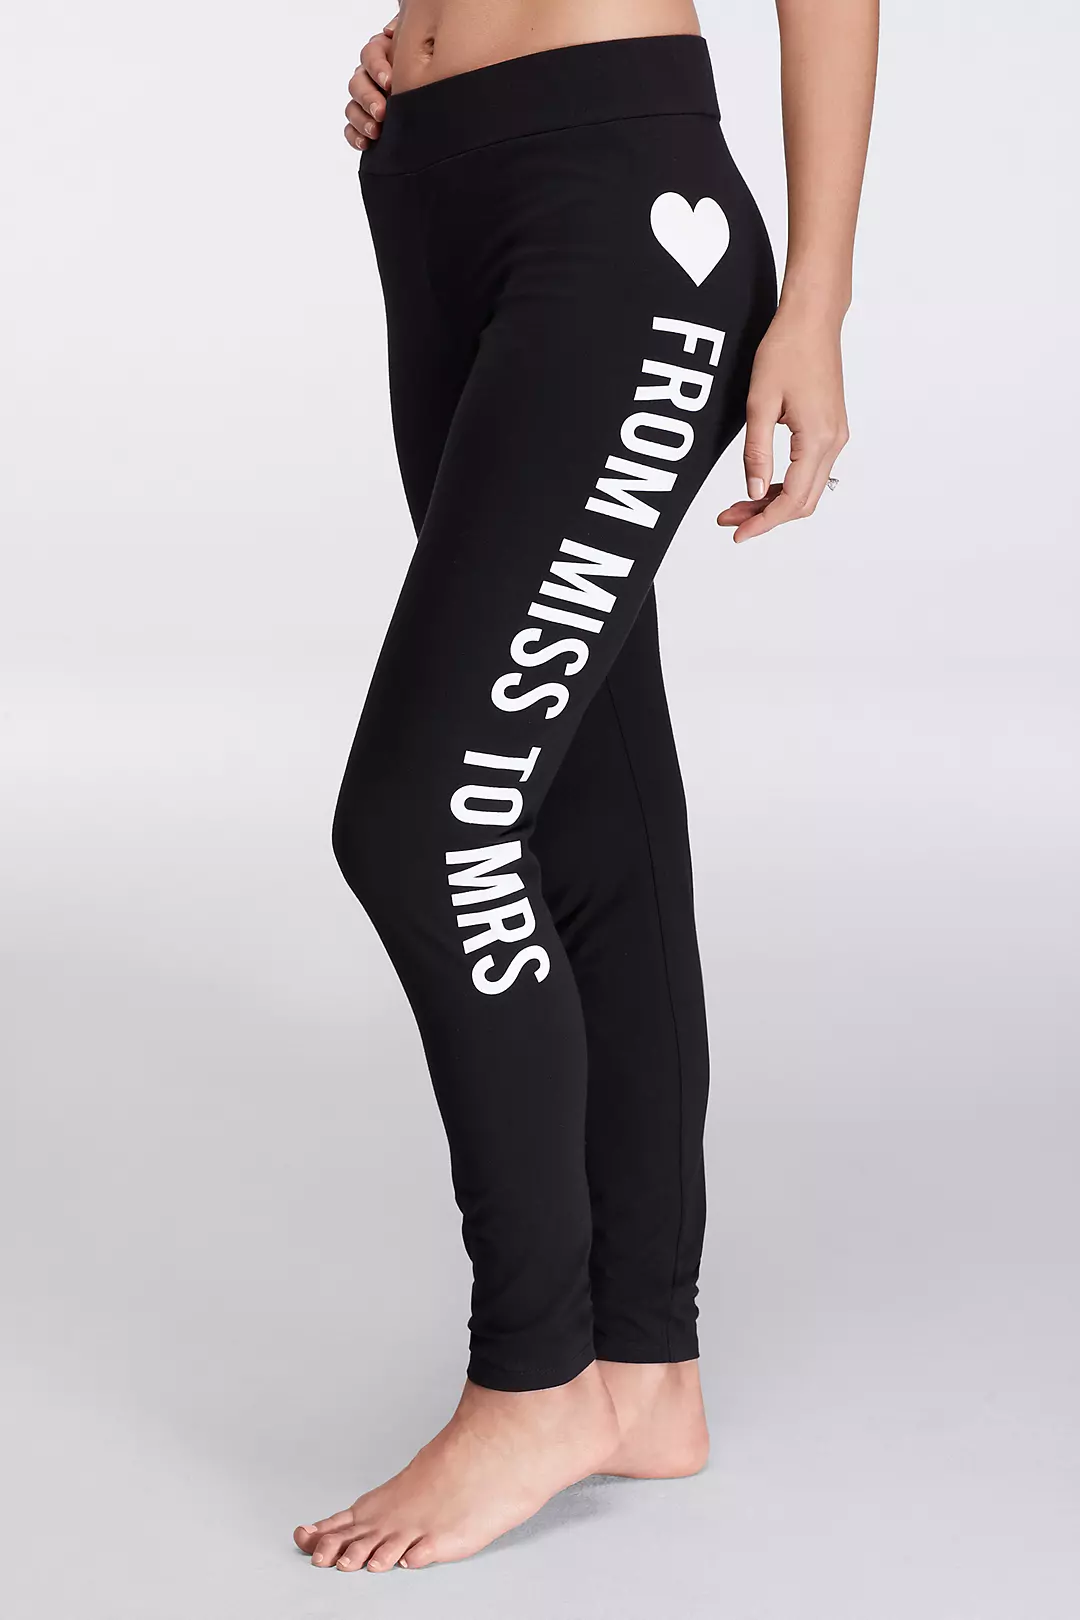 From Miss to Mrs Leggings Image